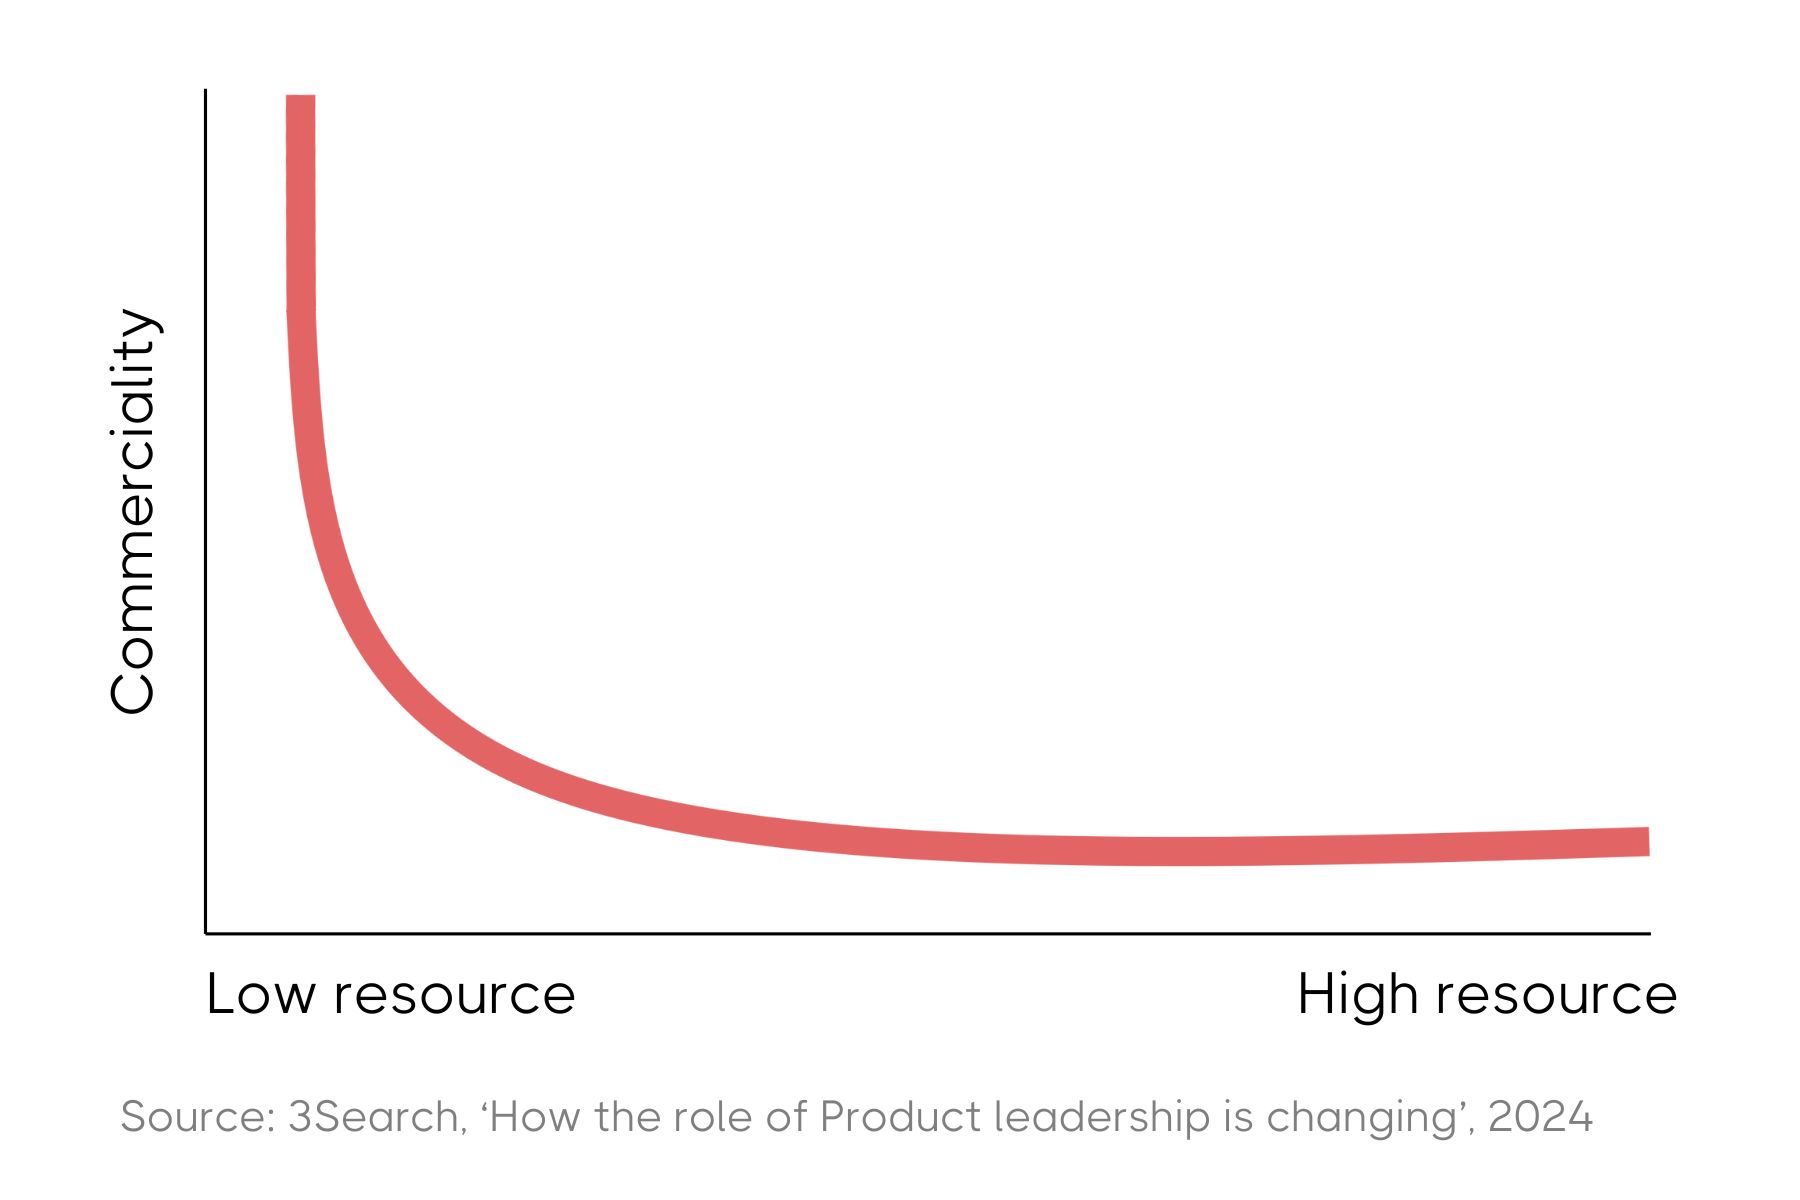 A line graph showing that when there is low resource in a product management team, commerciality is high, but commerciality decreases as product teams have more resource available to them.